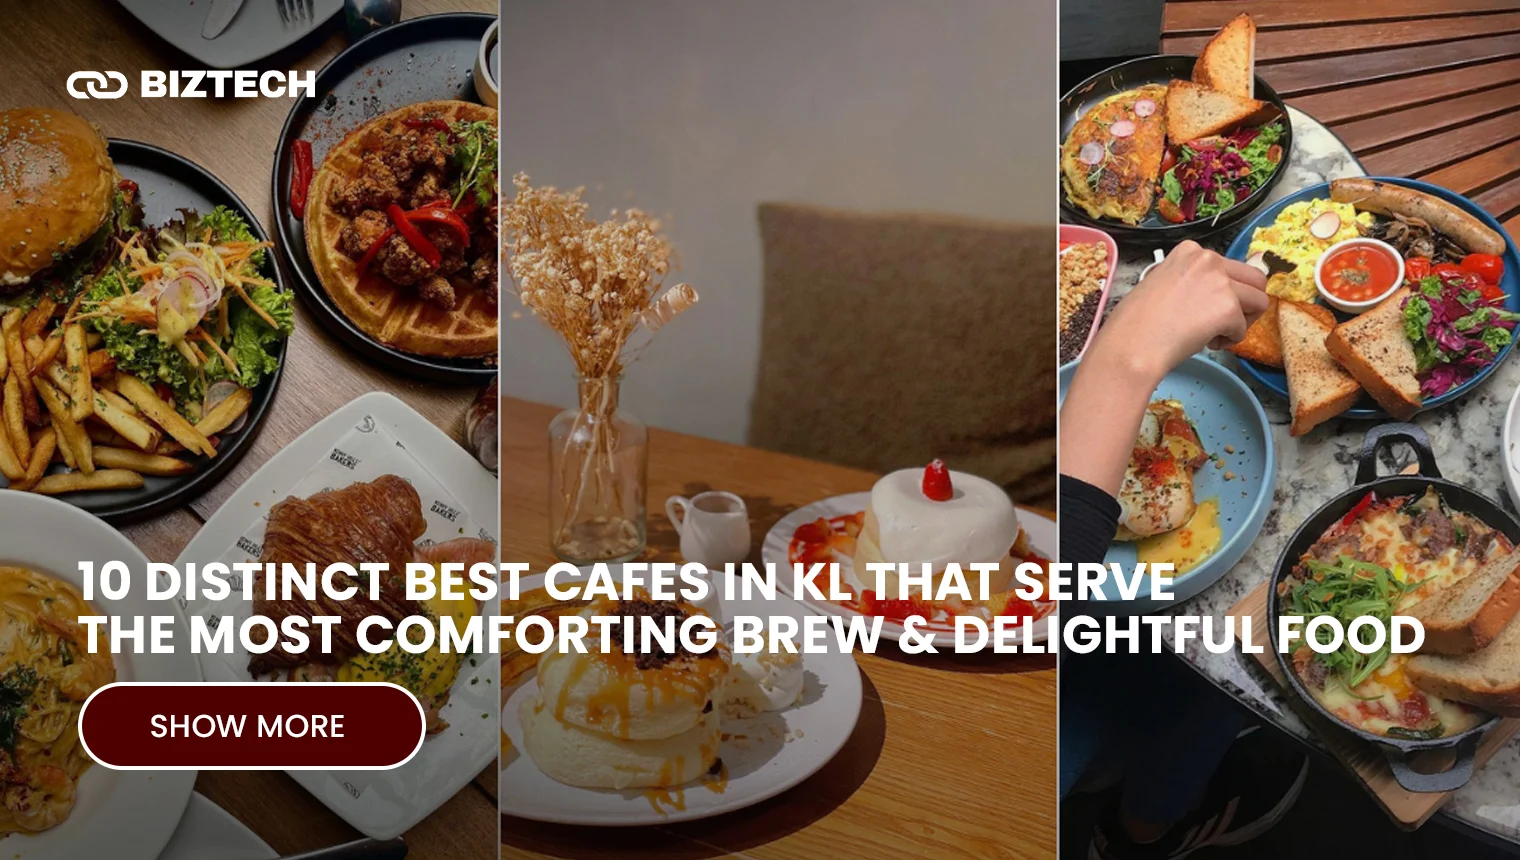 10 Distinct Best Cafes in KL That Serve The Most Comforting Brew _ Delightful Food